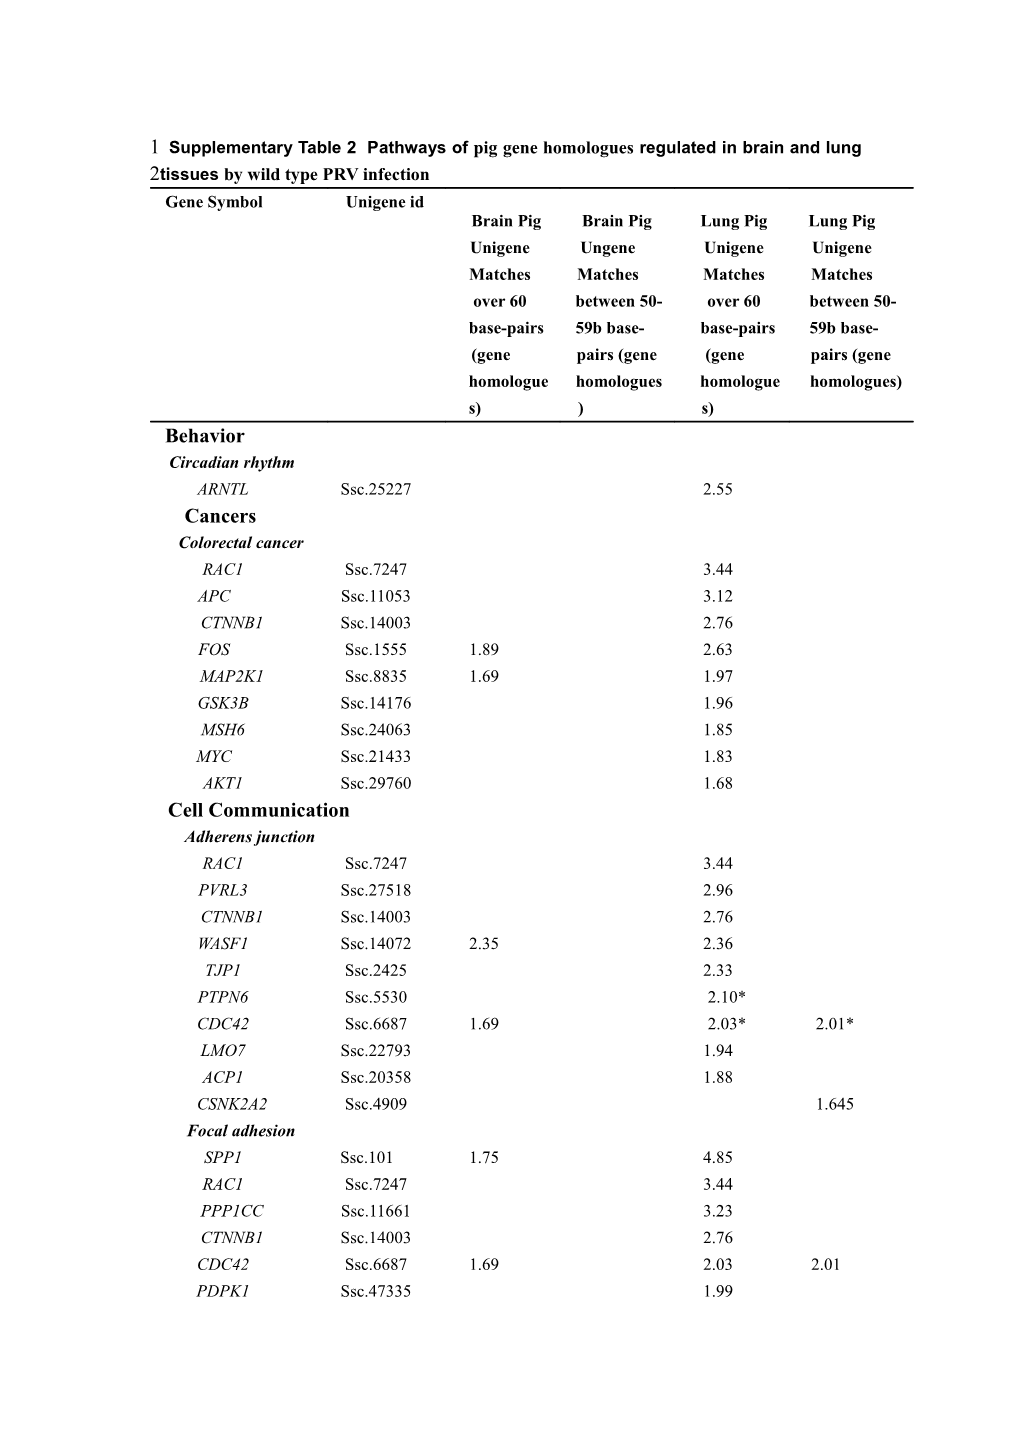 Supplementary Table 2 Pathways of Pig Gene Homologues Regulated in Brain and Lung Tissues